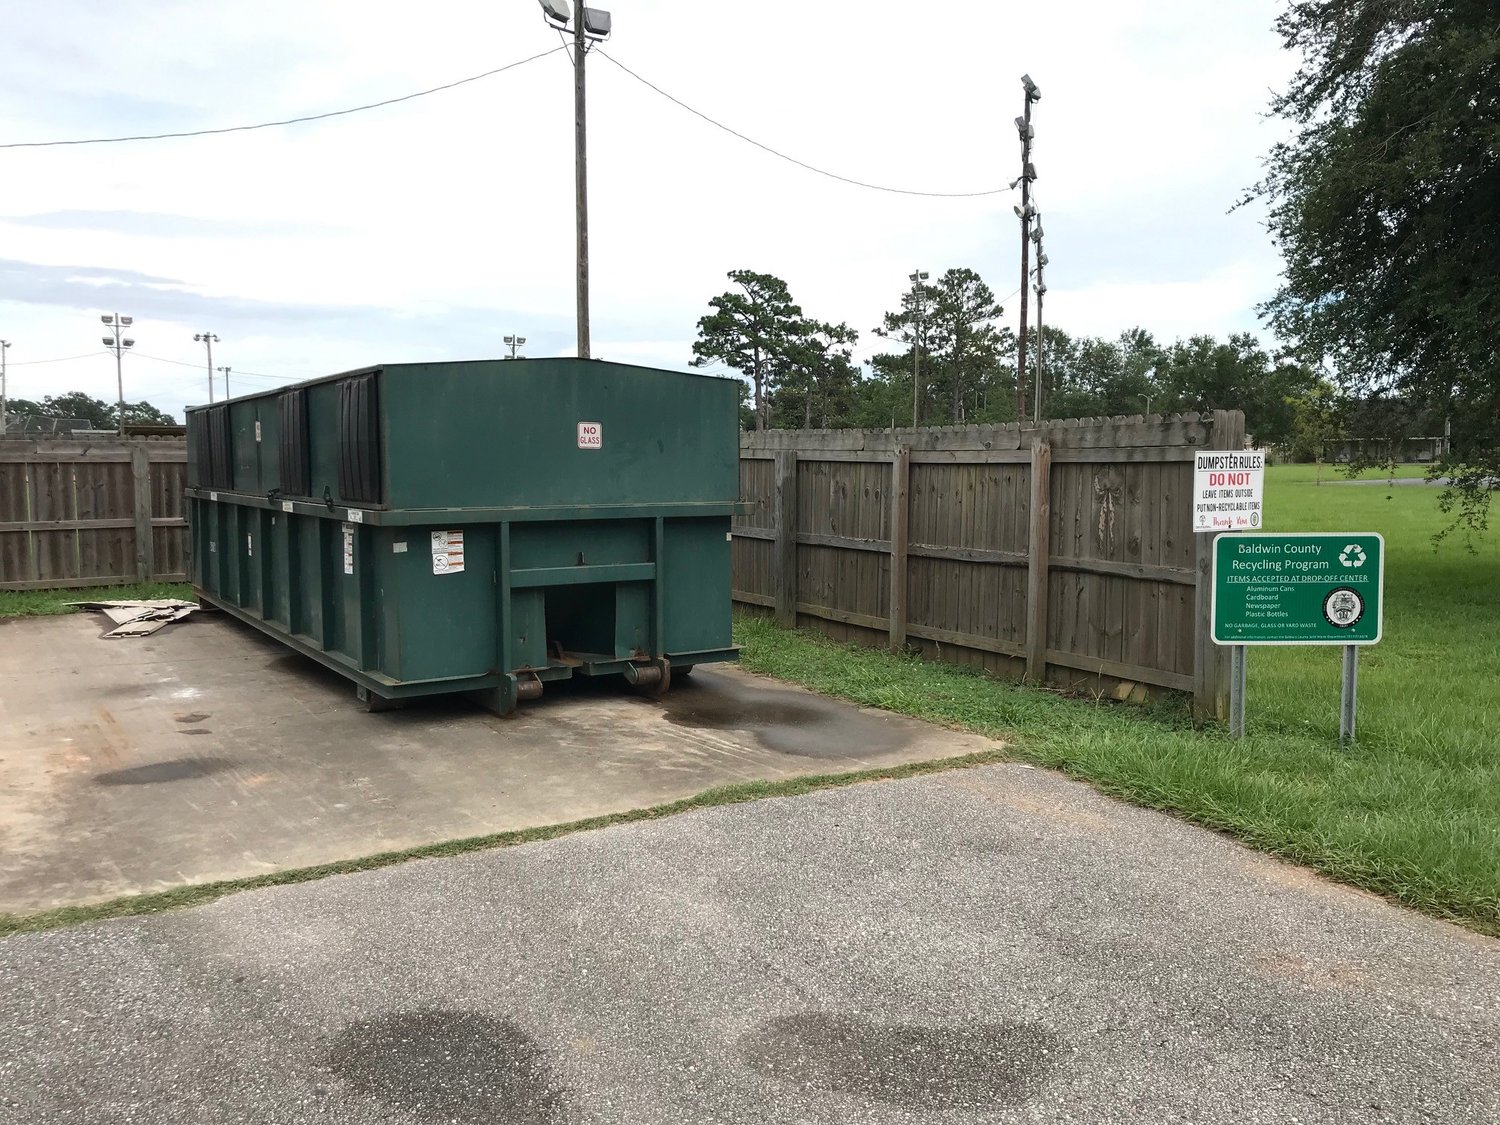 Recyclable materials collected at county and municipal sites around Baldwin County could be processed at a county facility under a plan by the County Commission. The commission voted to use $3.5 million in American Rescue Plan funds to start work on the facility.